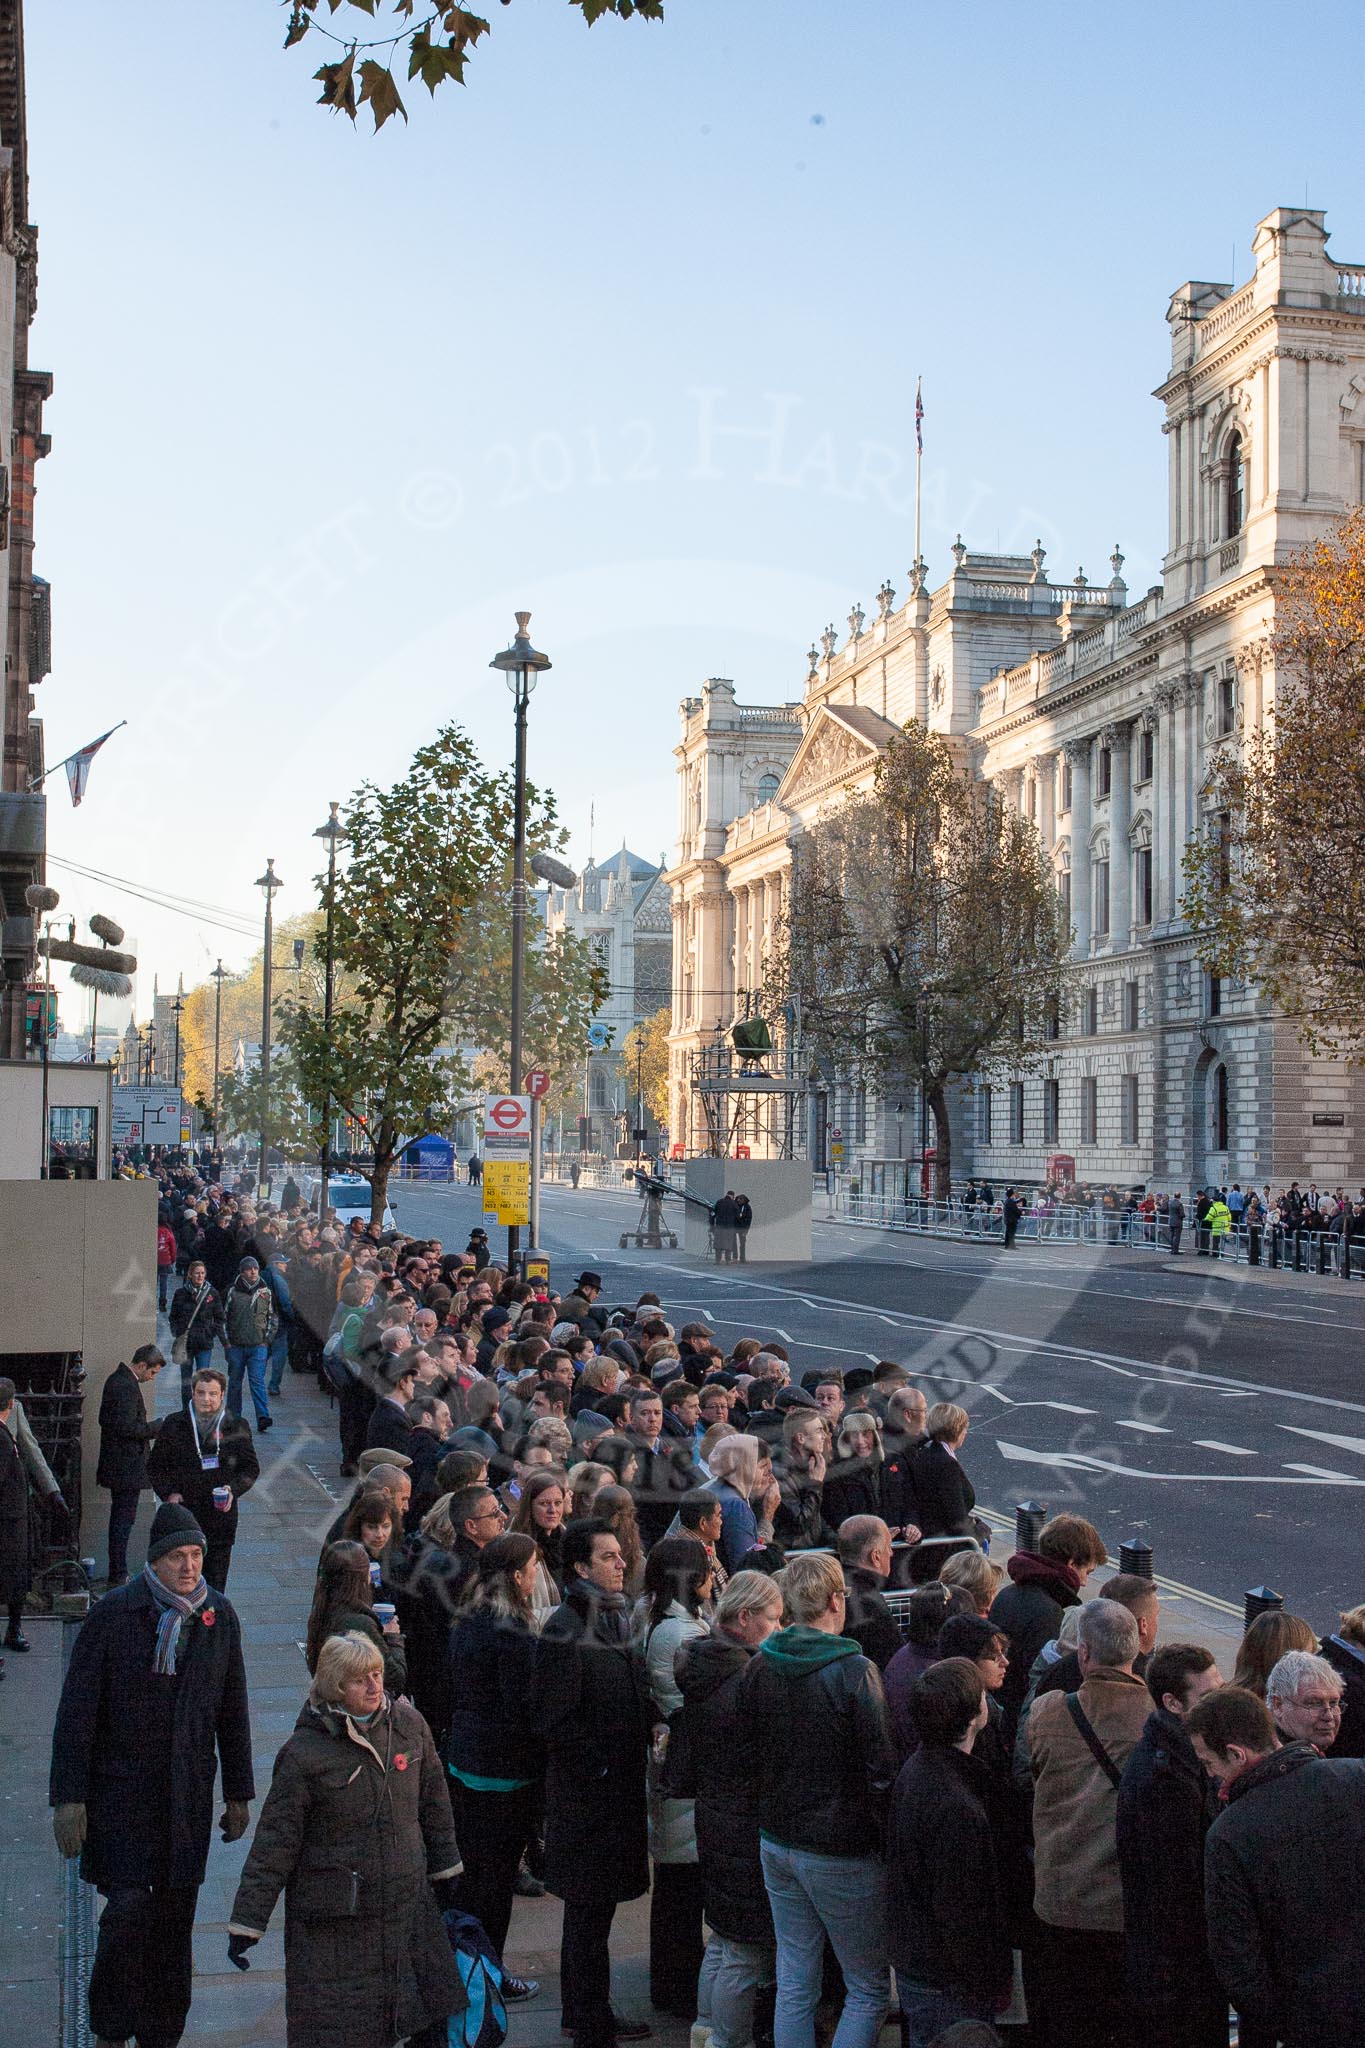 Whitehall, looking to the west, in the morning of Remembrance Sunday. Despite the early hour, and the security checks on both sides of Whitehall, a large crowd is building up.